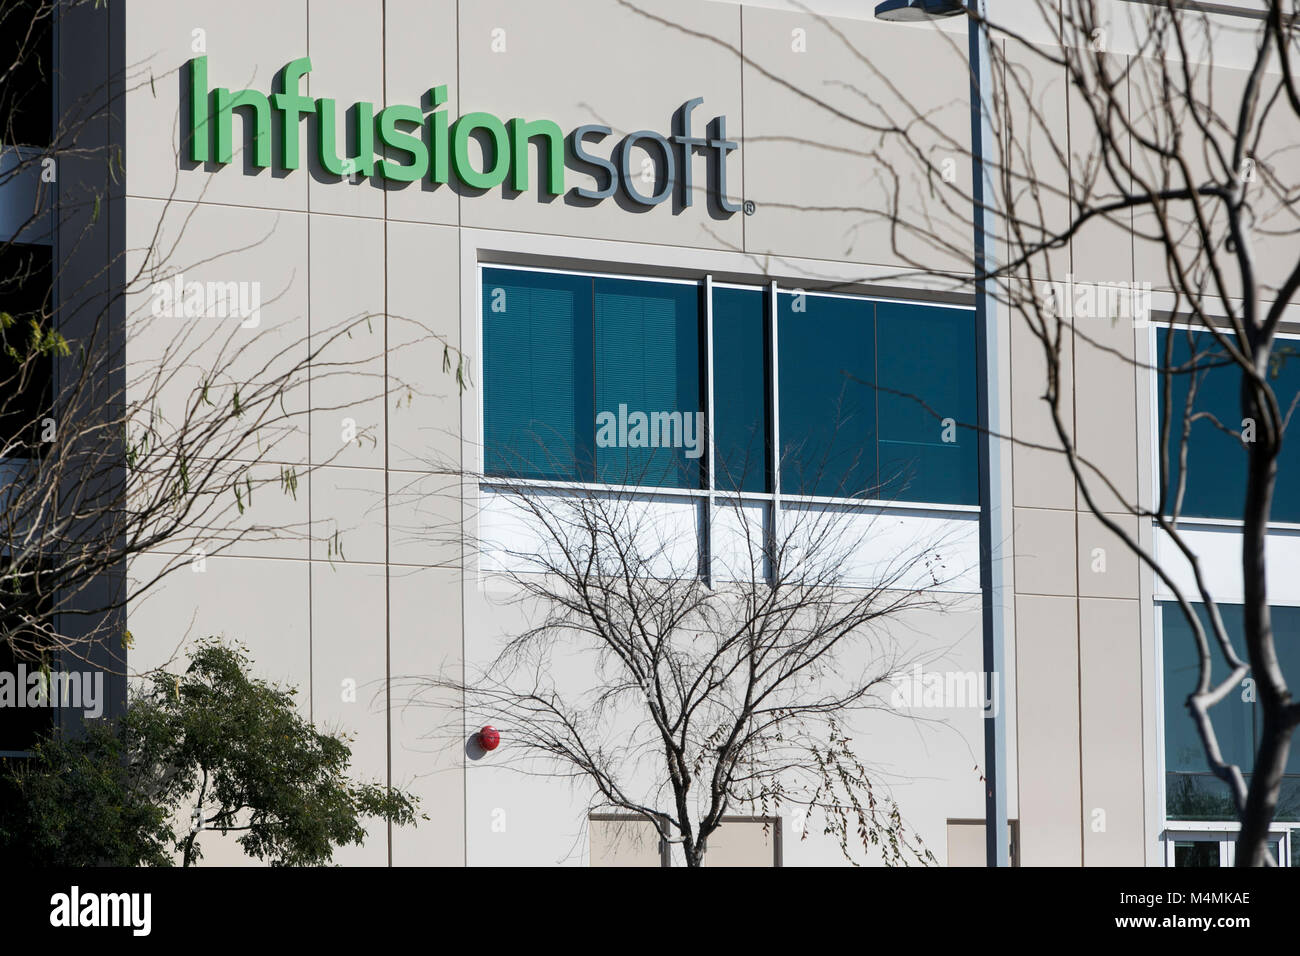 A logo sign outside of the headquarters of Infusionsoft in Chandler, Arizona, on February 3, 2018. Stock Photo